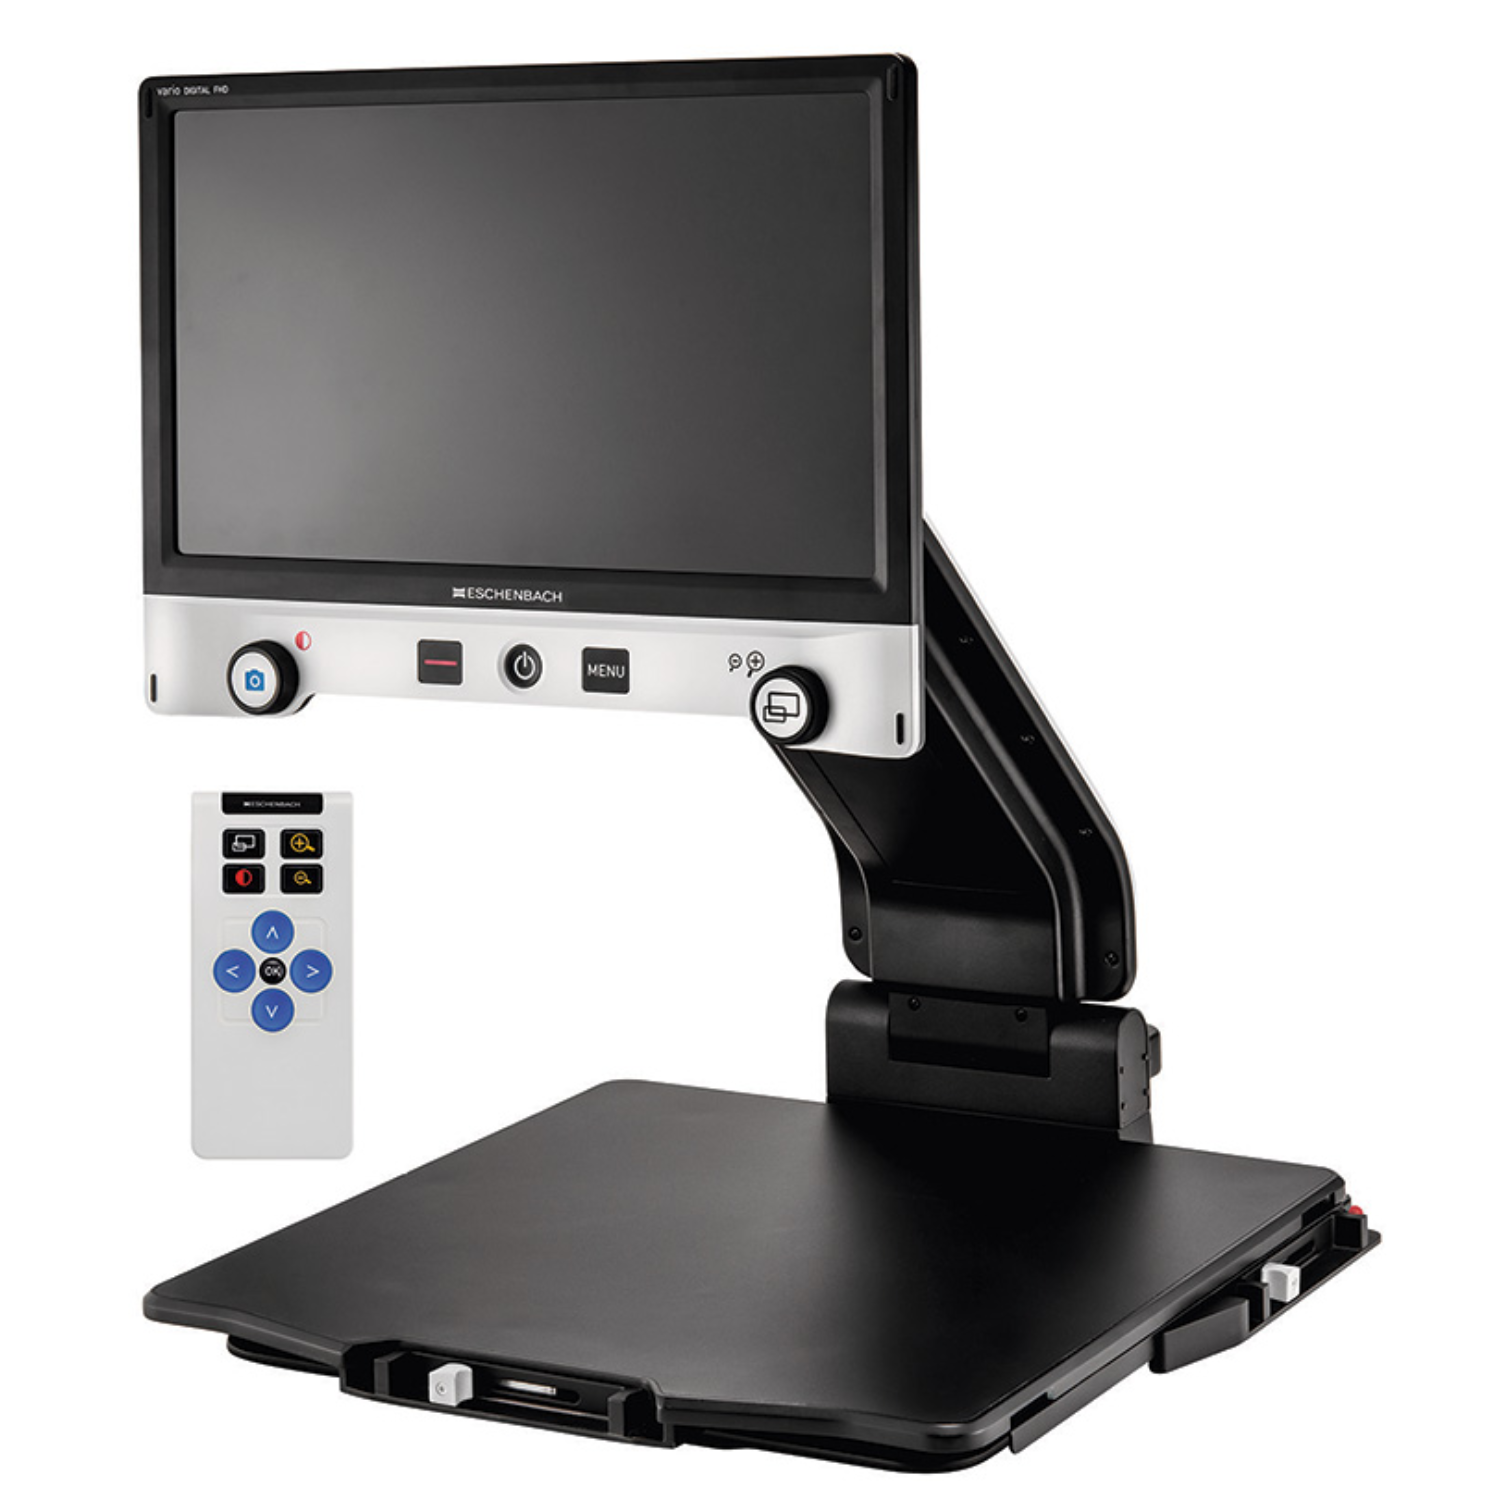 Image of the side of Vario Digital HD Advanced desktip video magnifier CCTV from Eschenbach Optik with optional XY Table and Battery Pack